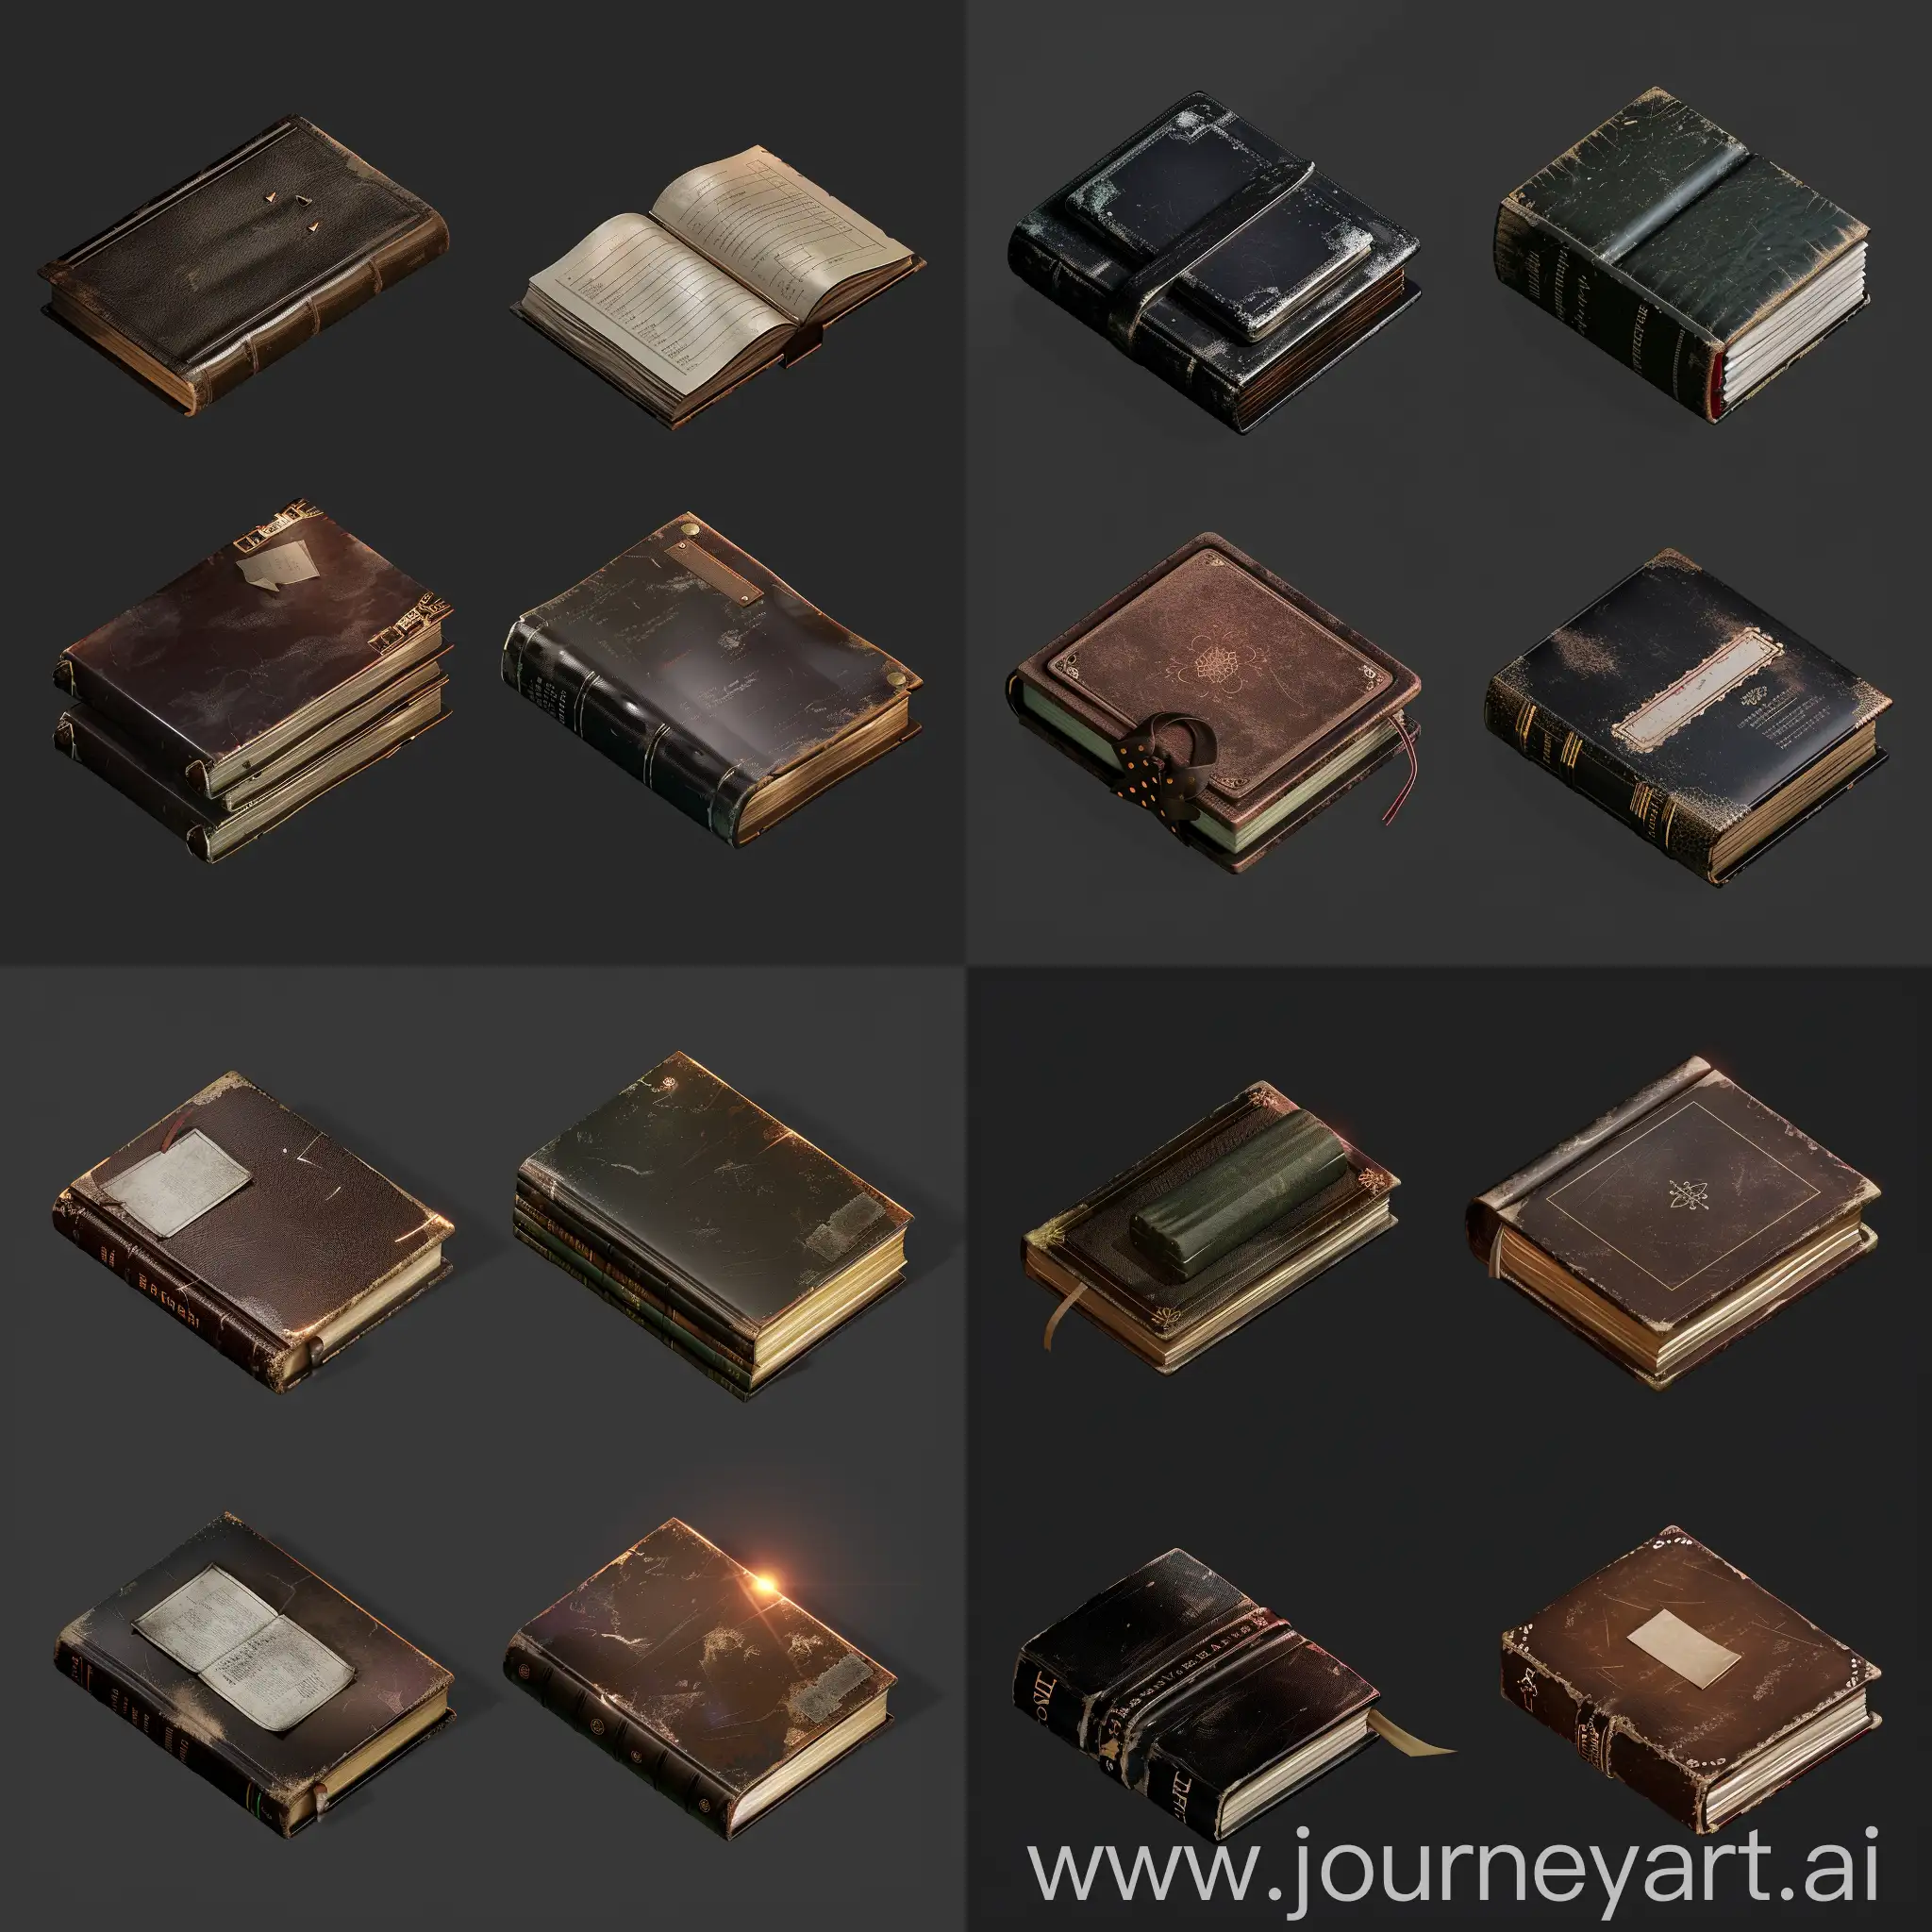 Isometric-Set-of-Worn-Books-Realistic-3D-Game-Asset-with-Shiny-Leather-Cover